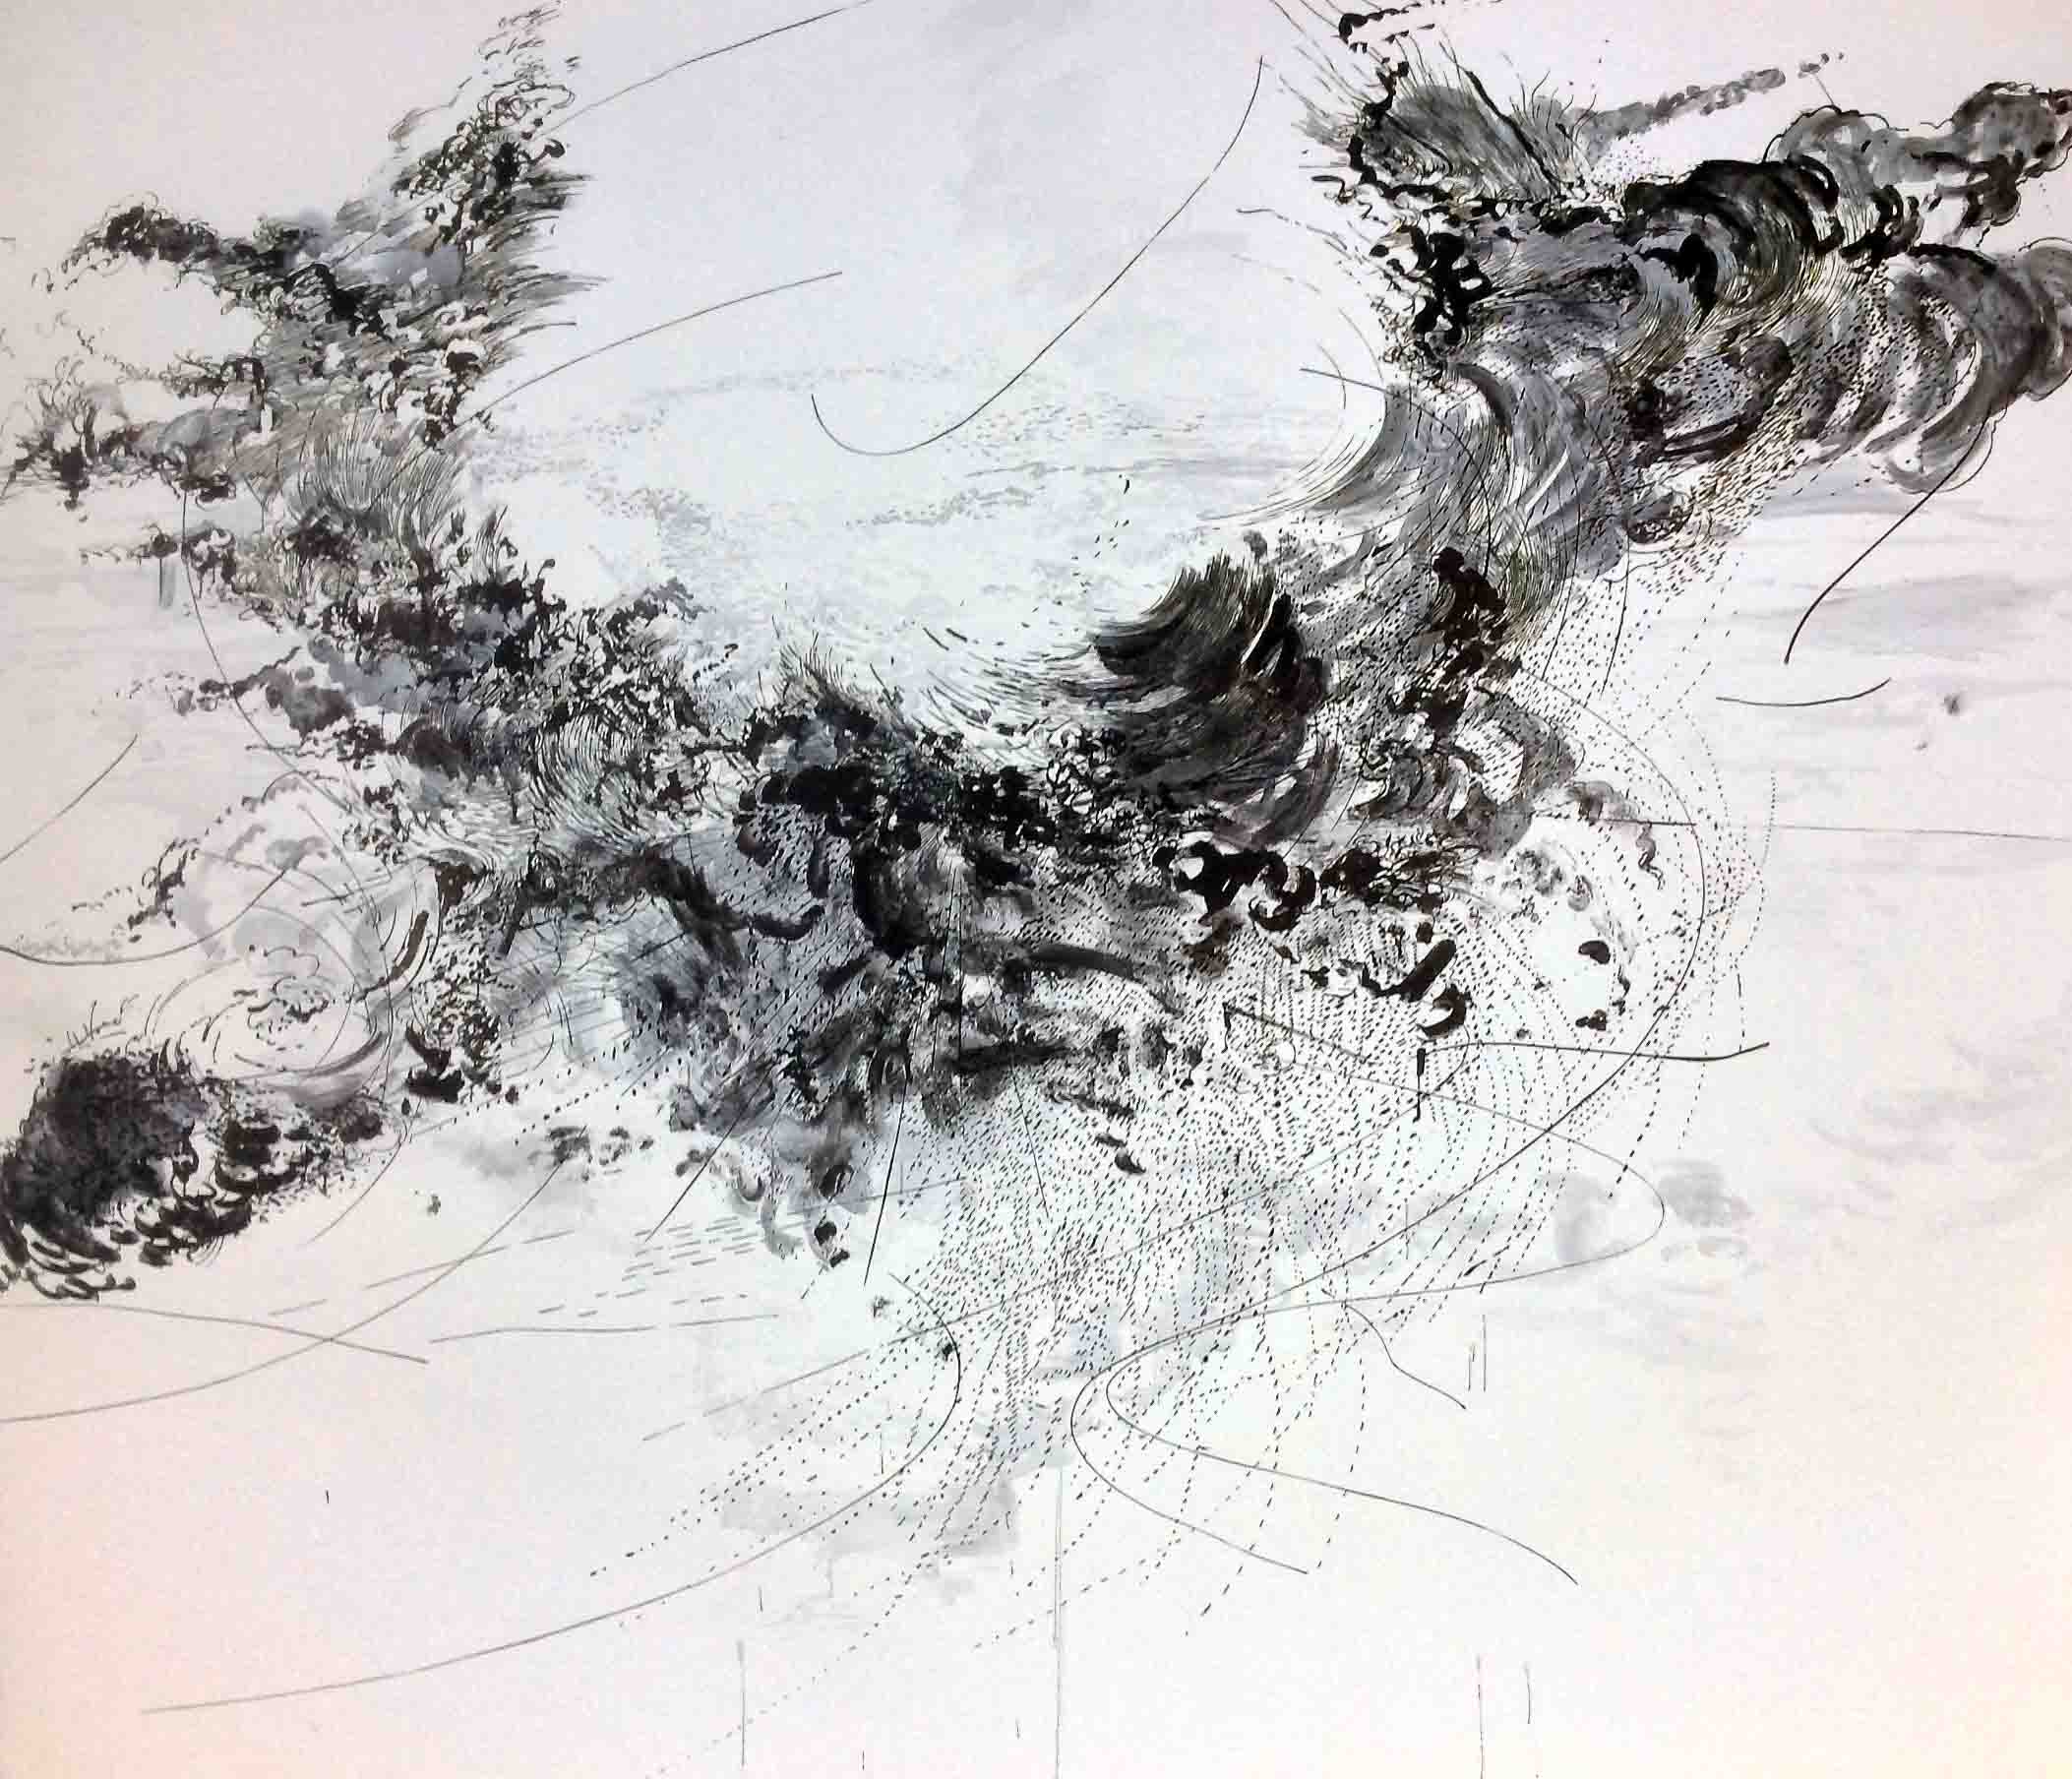 ABSTRACT CHARCOAL AND TAPE DRAWING TECHNIQUE 